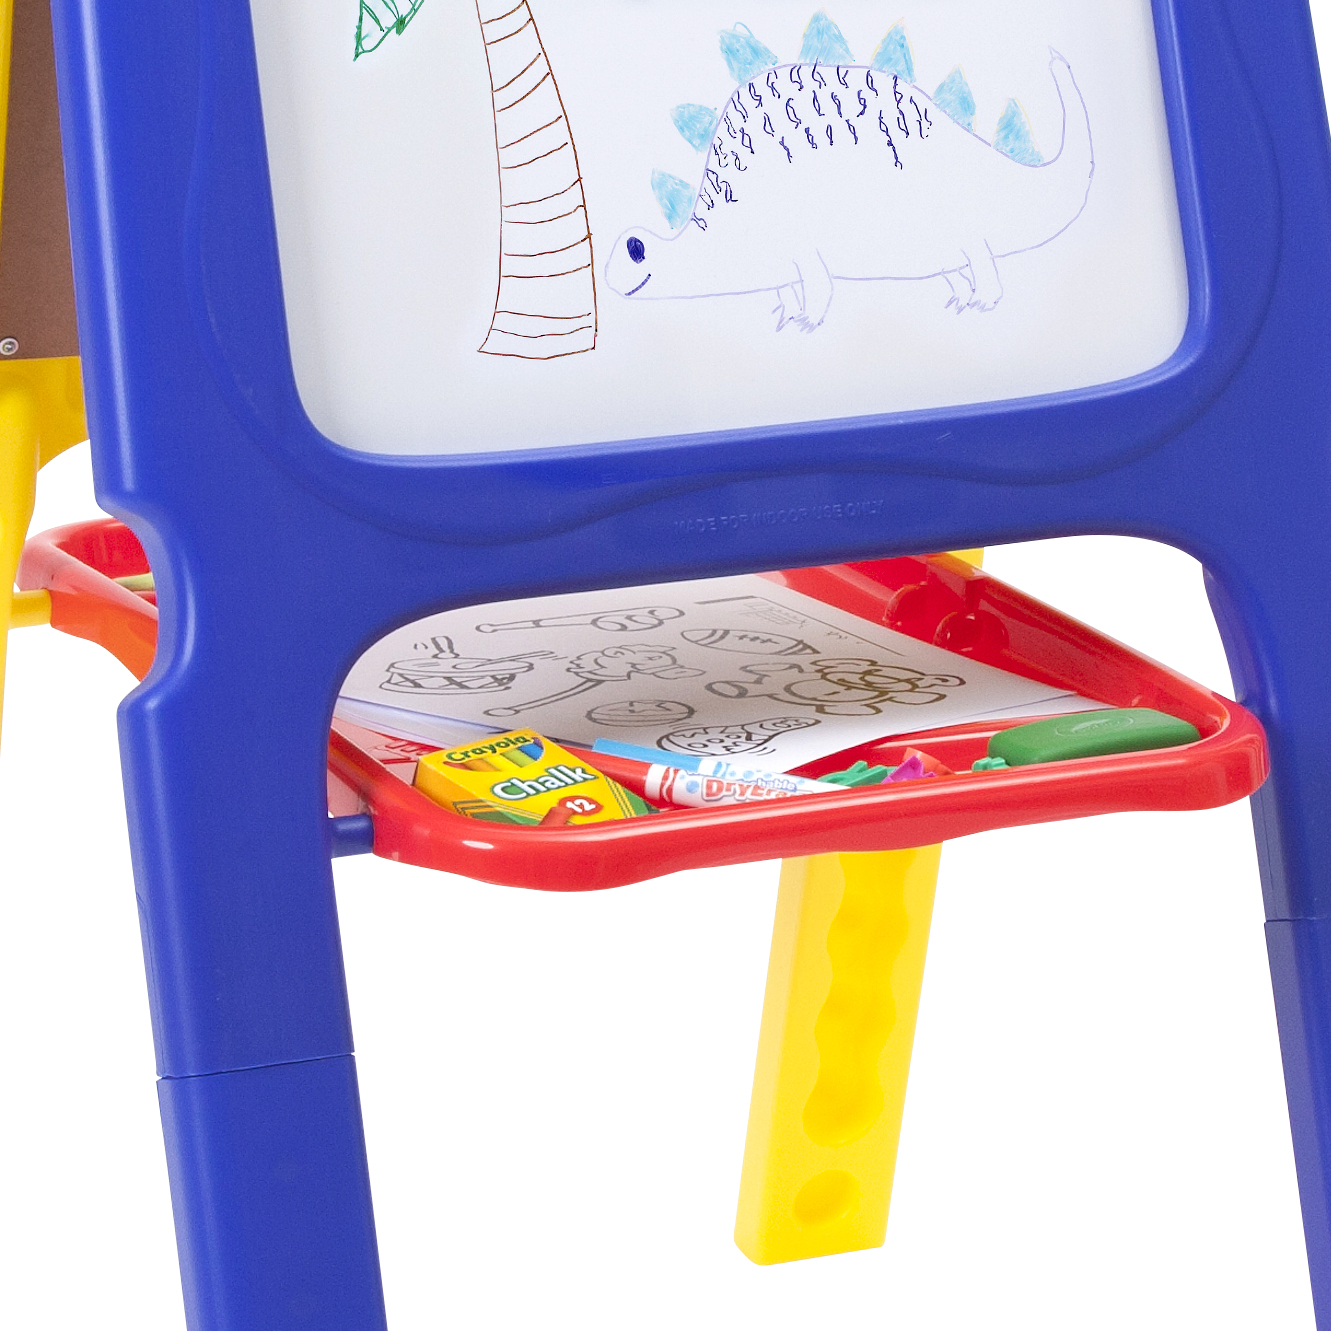 Crayola 3-in-1 Magnetic Double Easel with Letters and Numbers - image 3 of 5